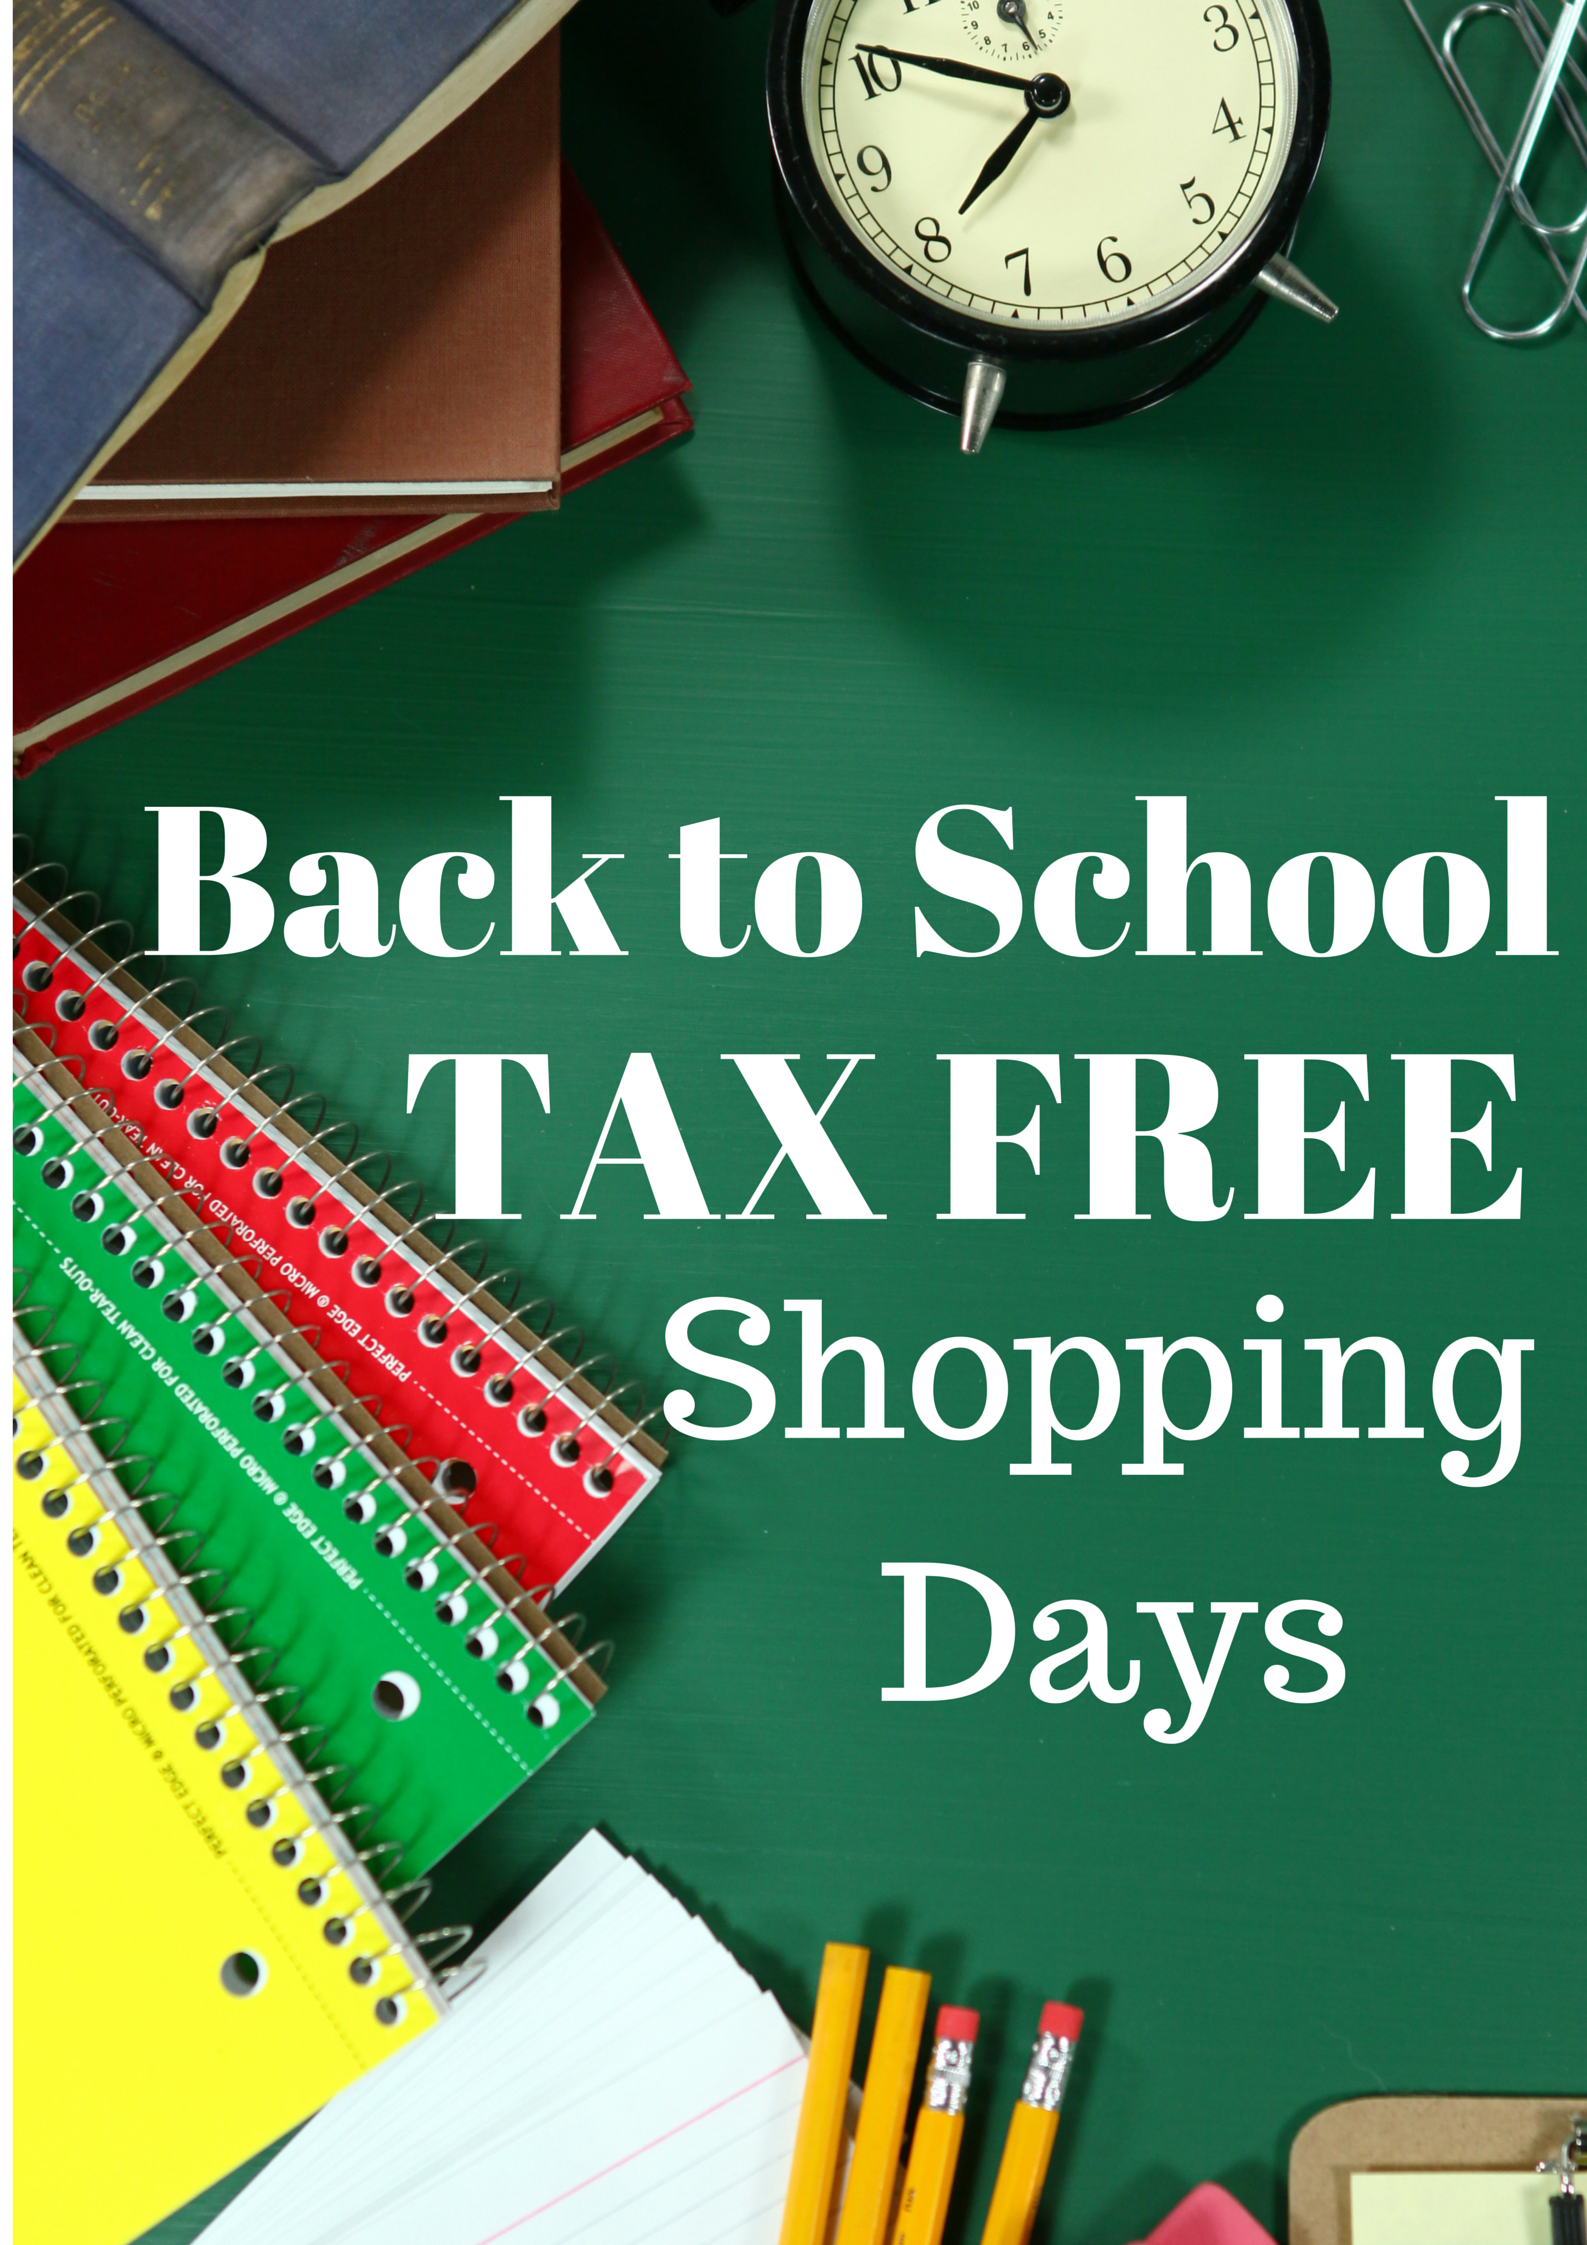 Back to School Tax Free Shopping Dates by State